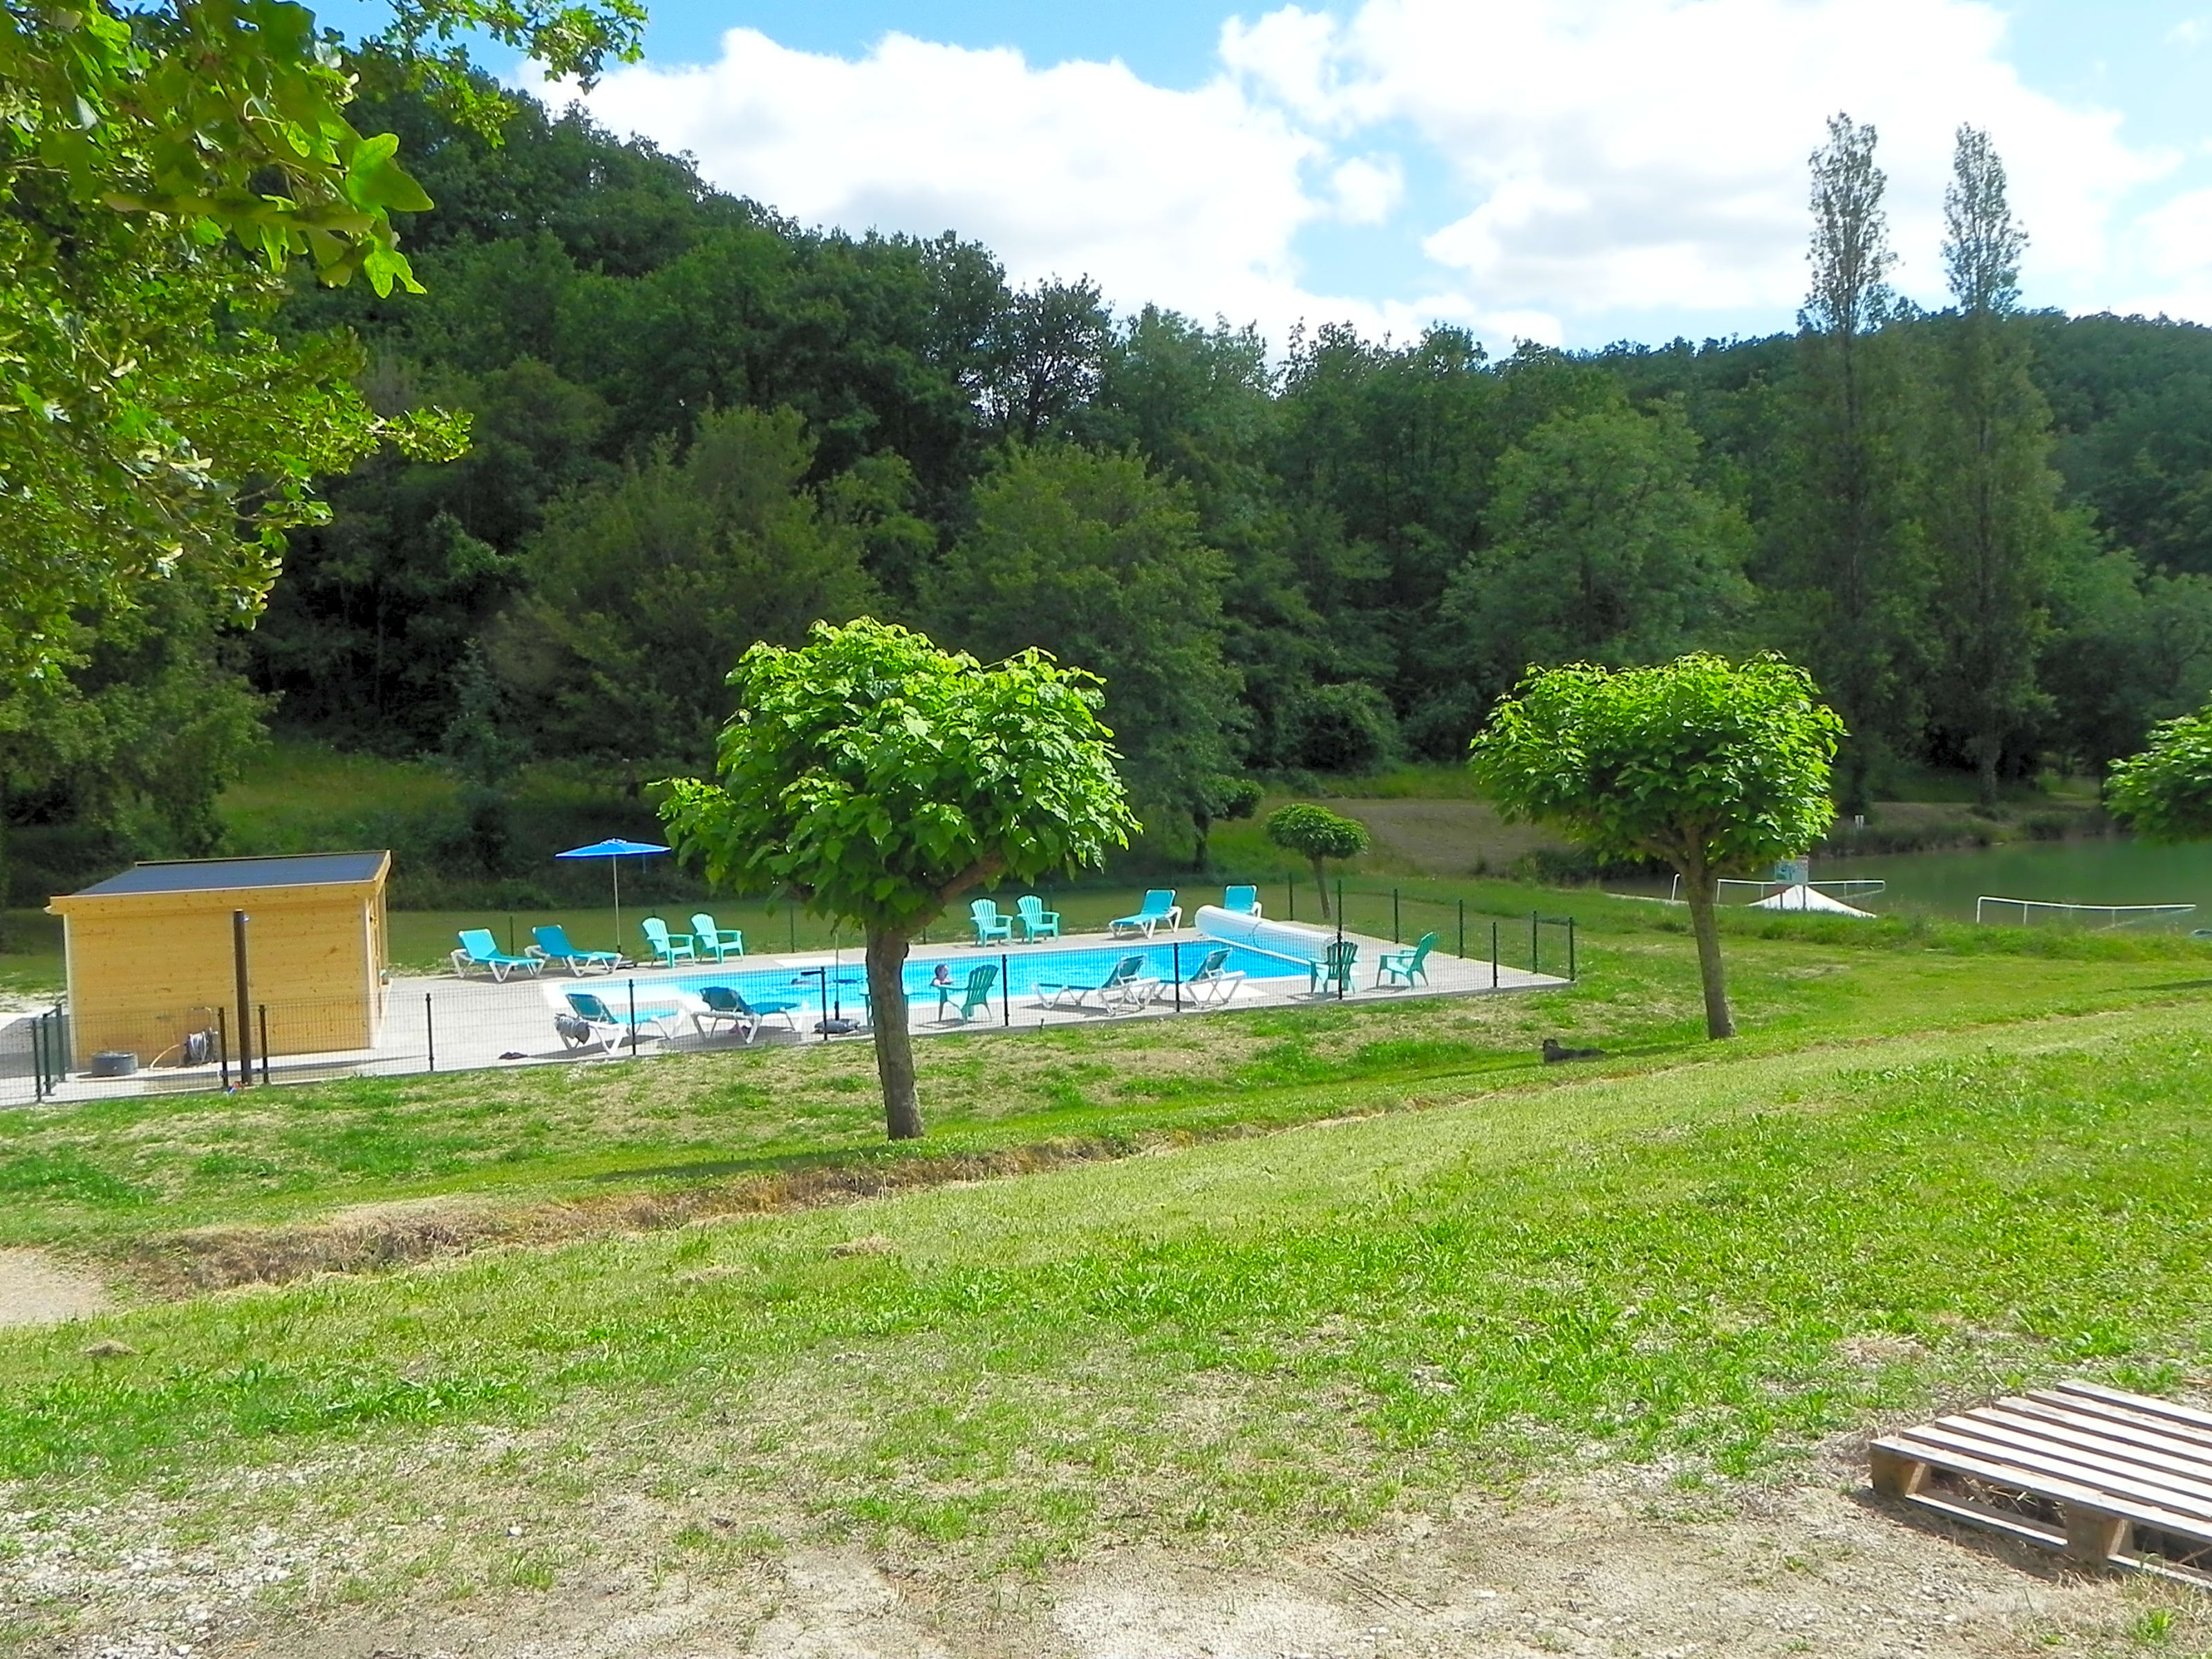 Camping Les 2 Lacs, Beauville - Updated 2020 prices - Pitchup®